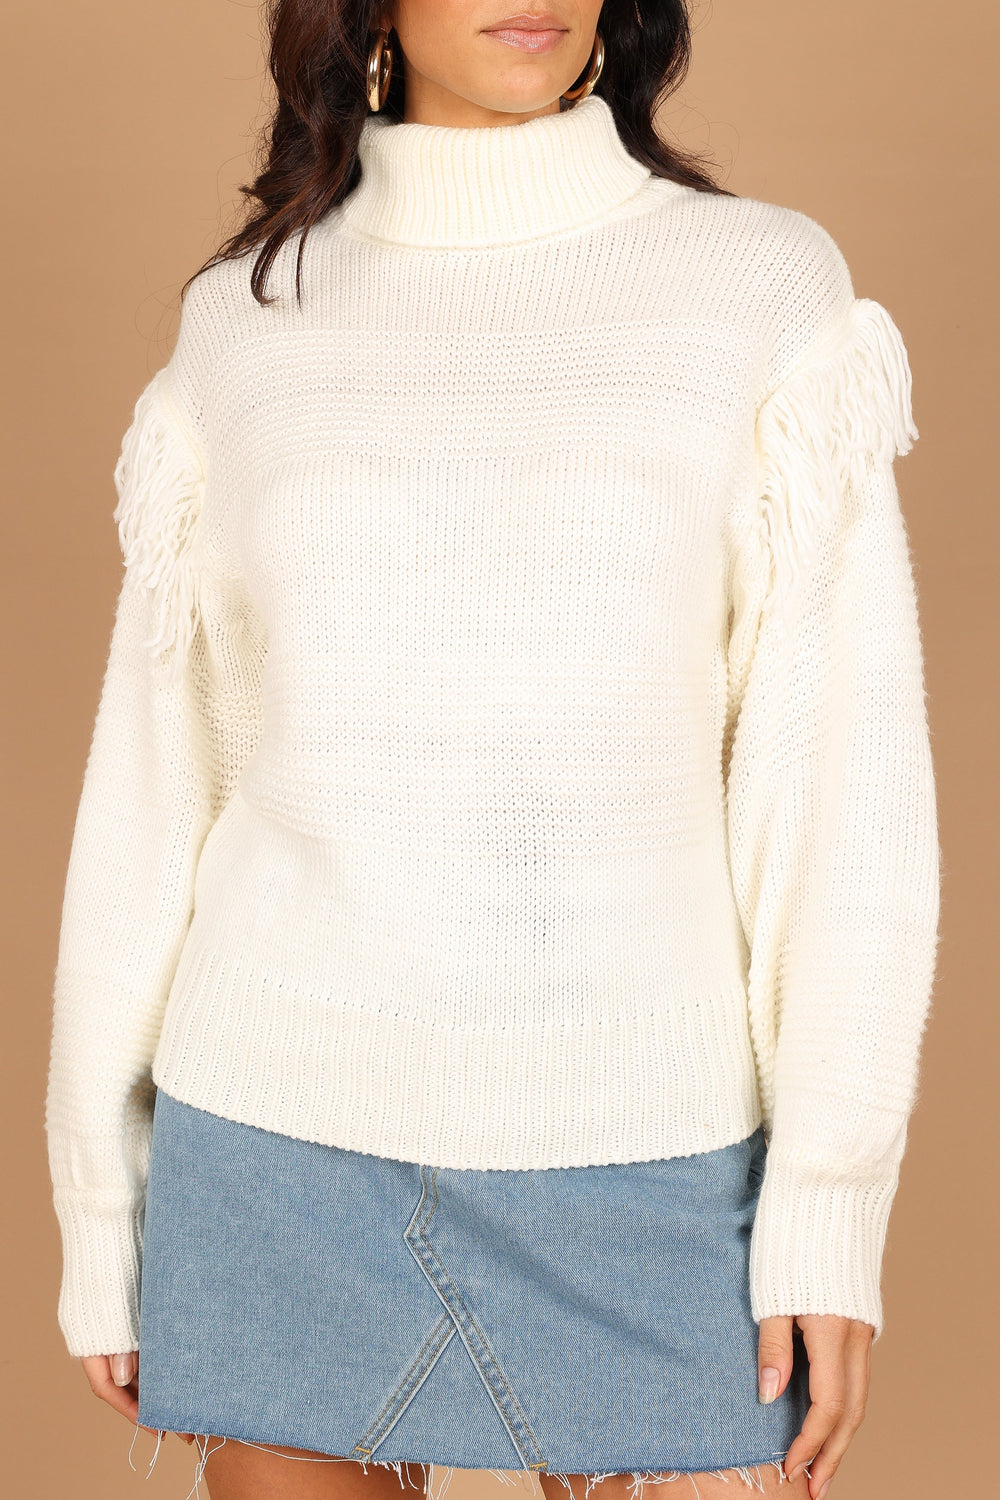 Petal and Pup USA KNITWEAR Christie Fringe Knit Sweater - Cream